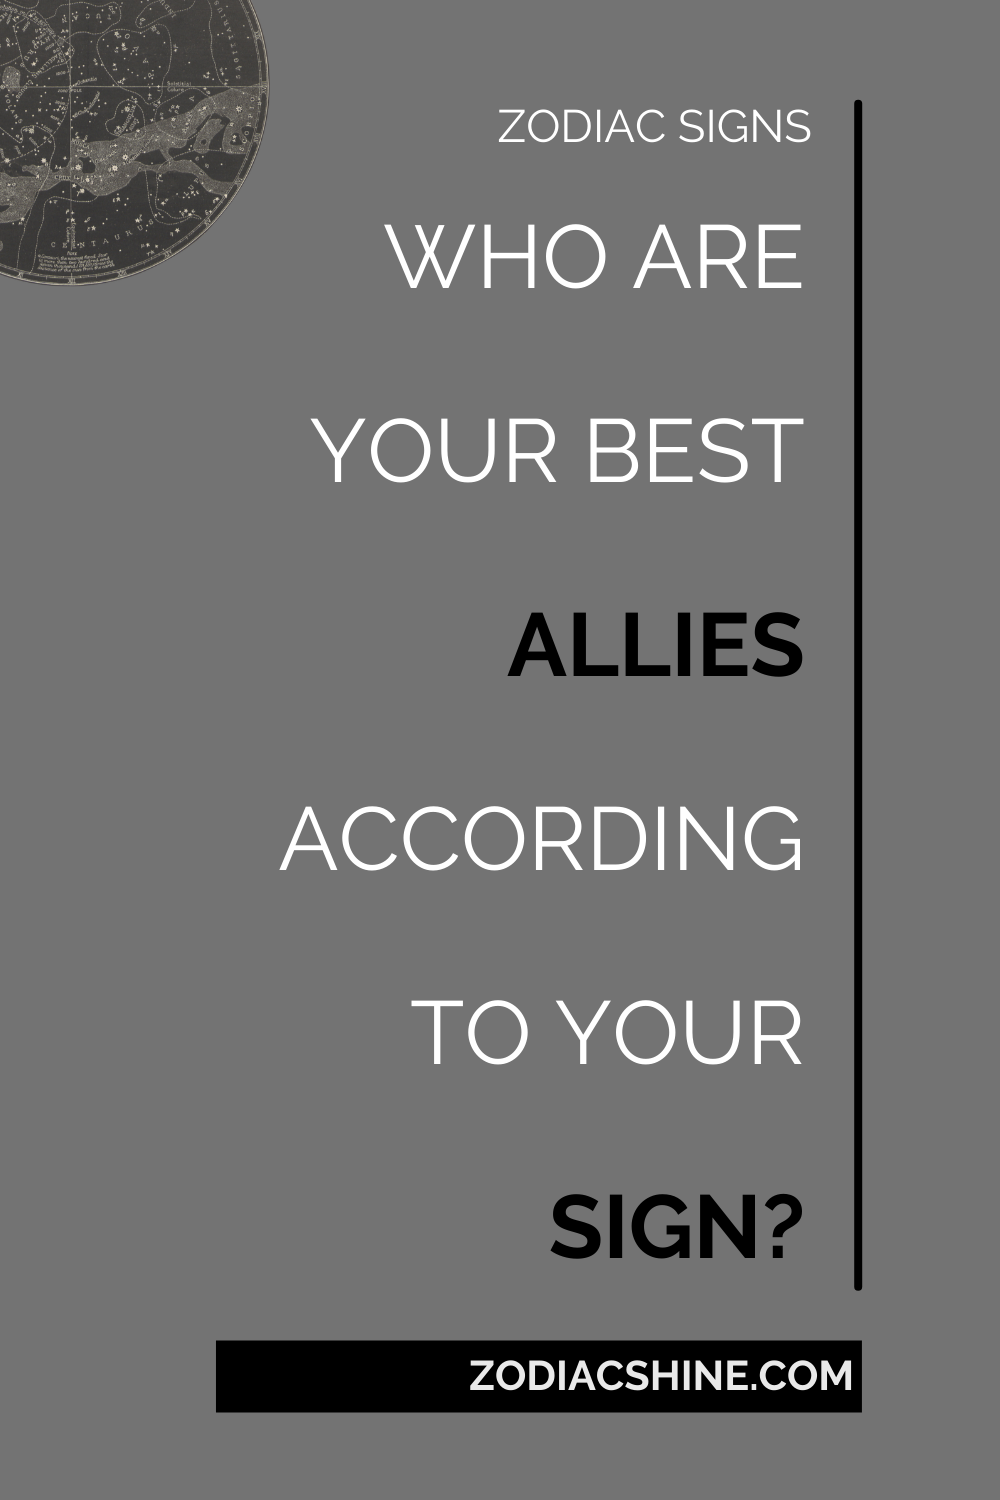 WHO ARE YOUR BEST ALLIES ACCORDING TO YOUR SIGN?